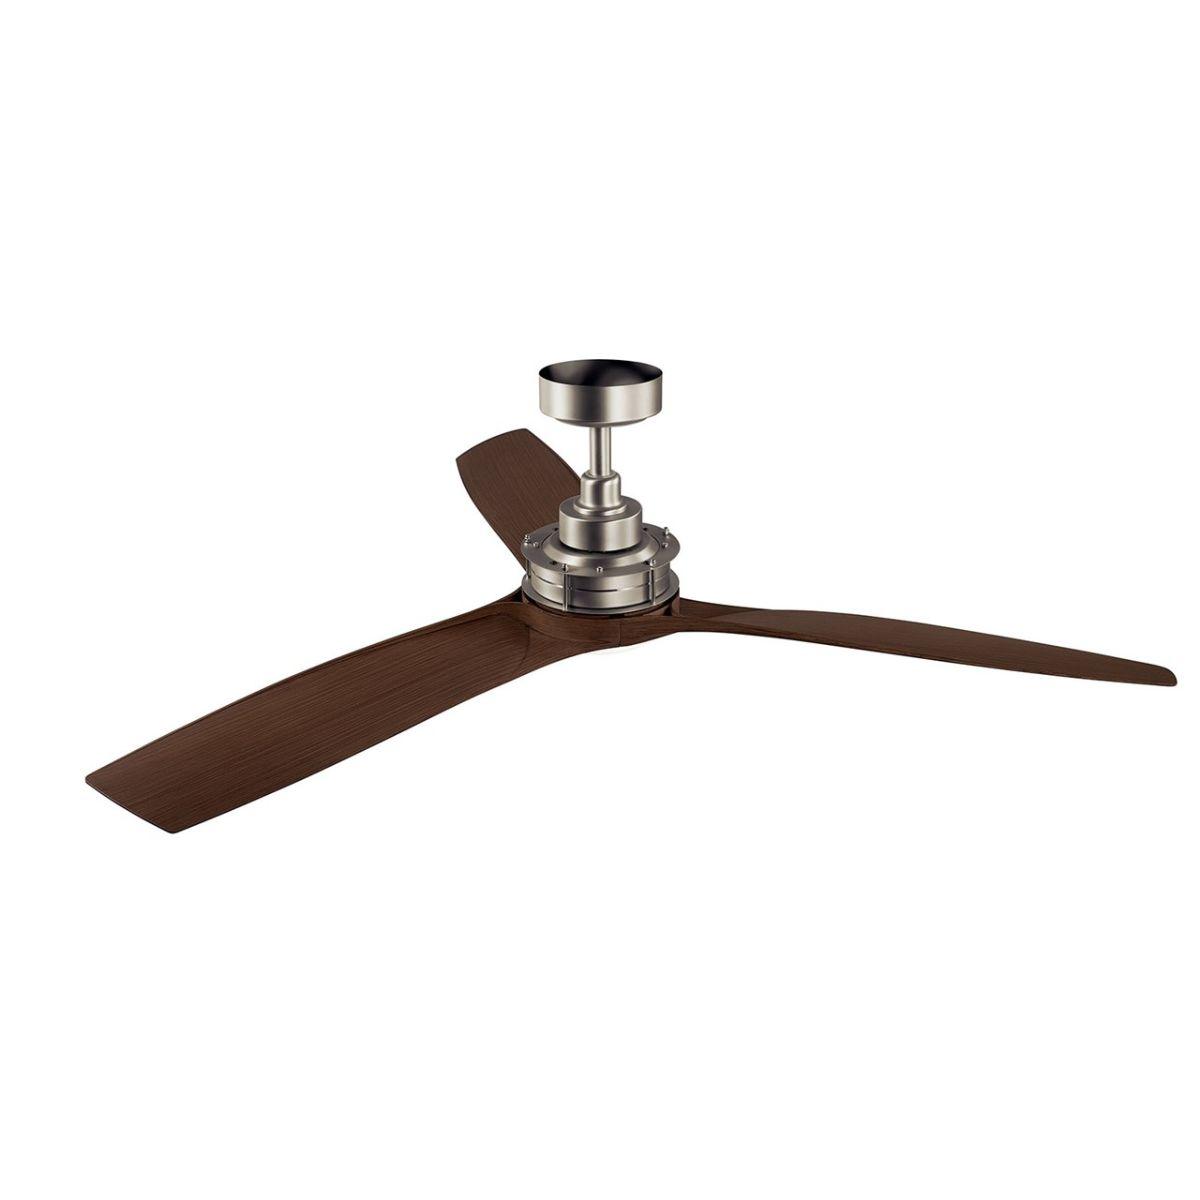 Ried 56 Inch Propeller Outdoor Ceiling Fan With Wall Control